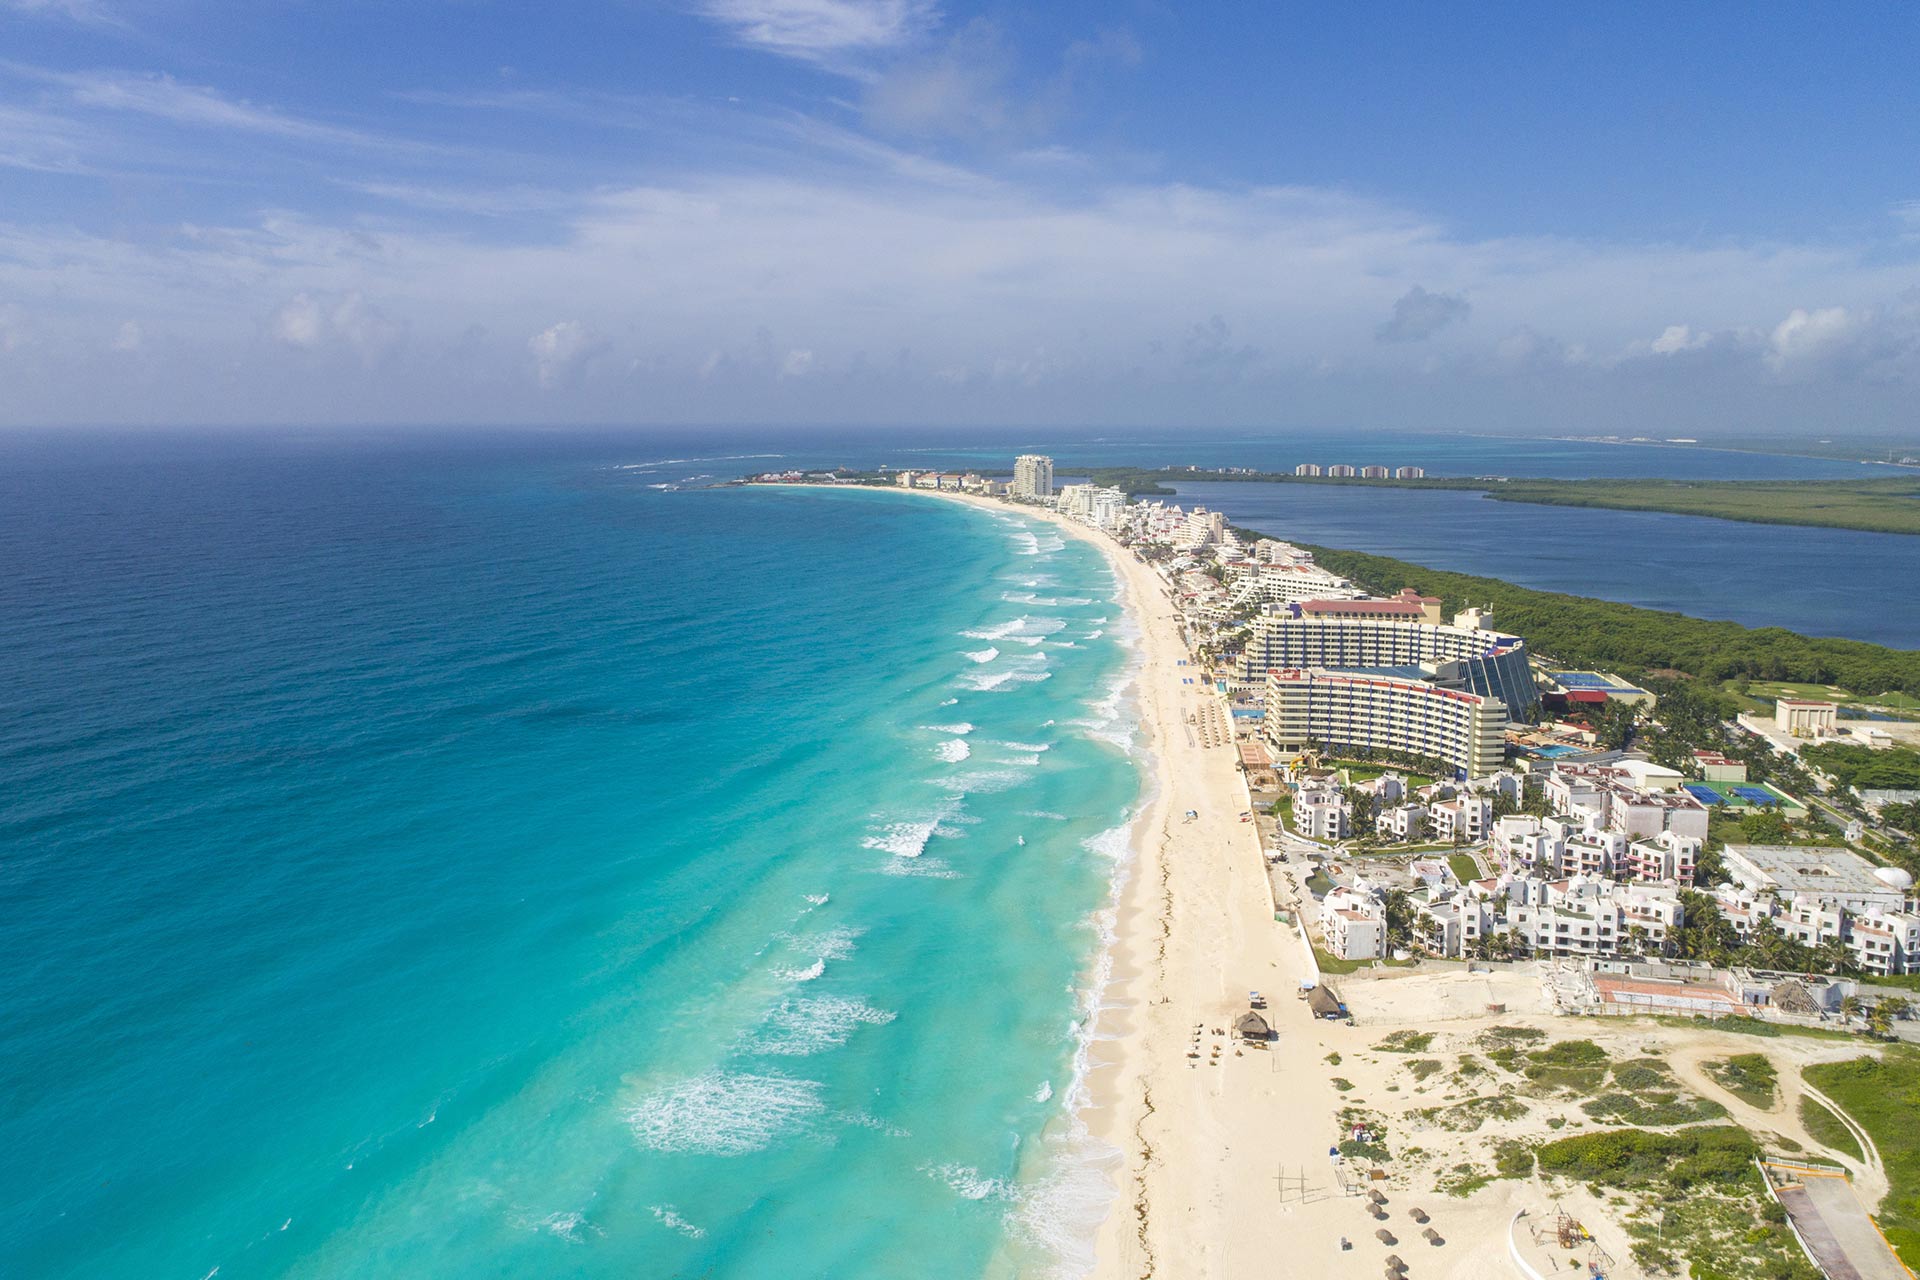 An aerial shot of the beaches in Cancun, Mexico.